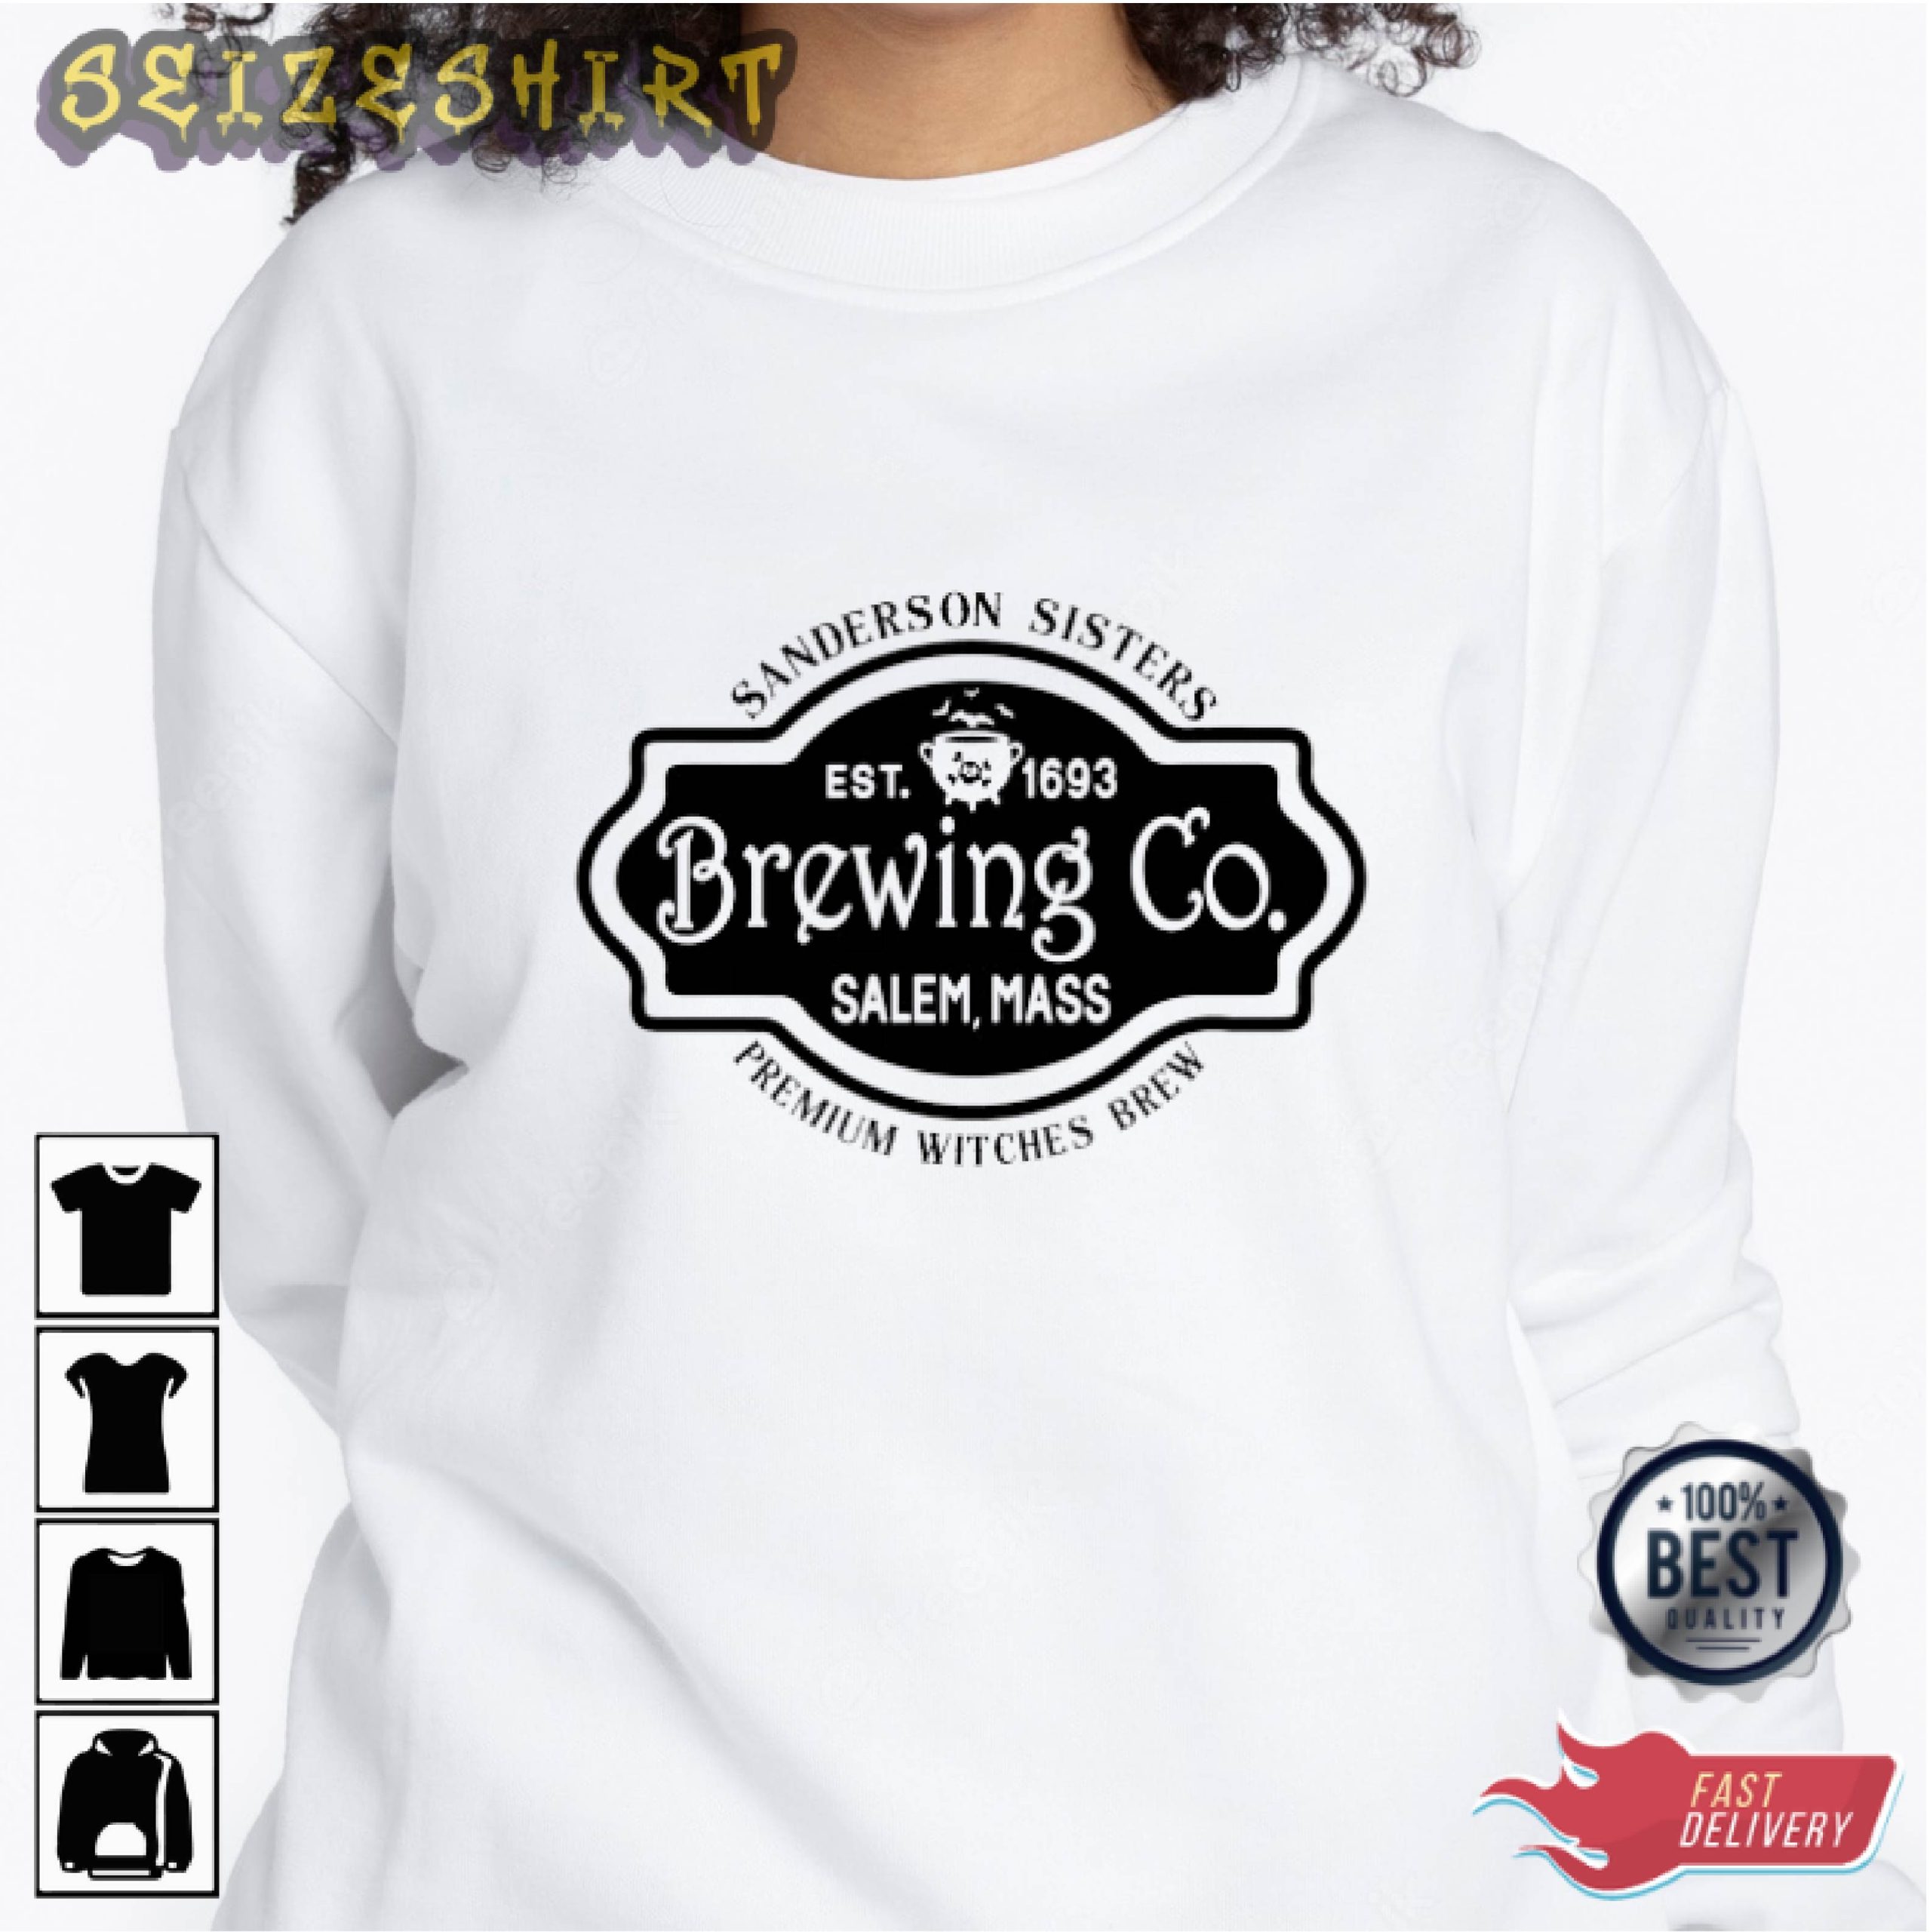 Brewing Co Black And White Graphic Tee Long Sleeve Shirt